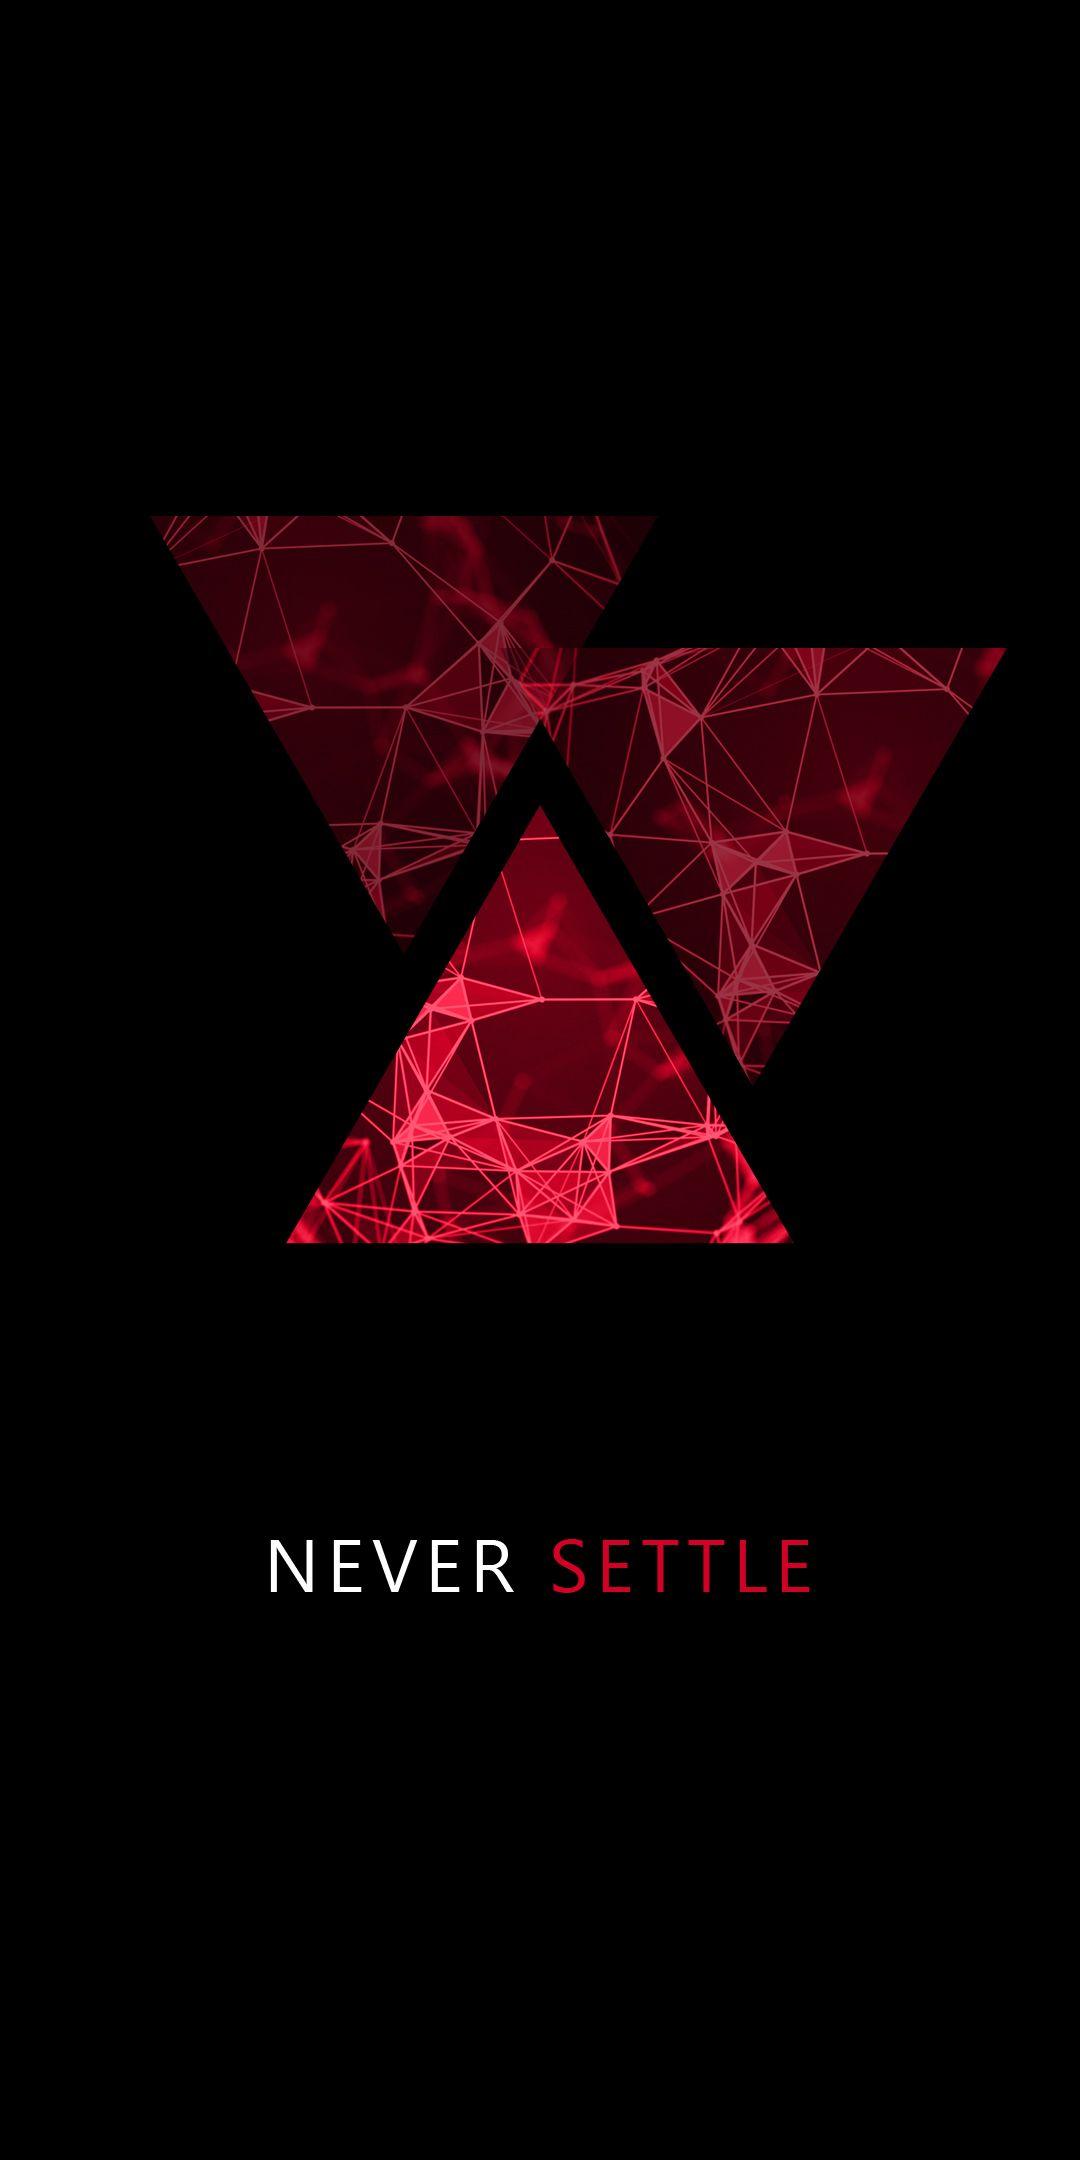 OnePlus 5T Wallpapers - Top Free